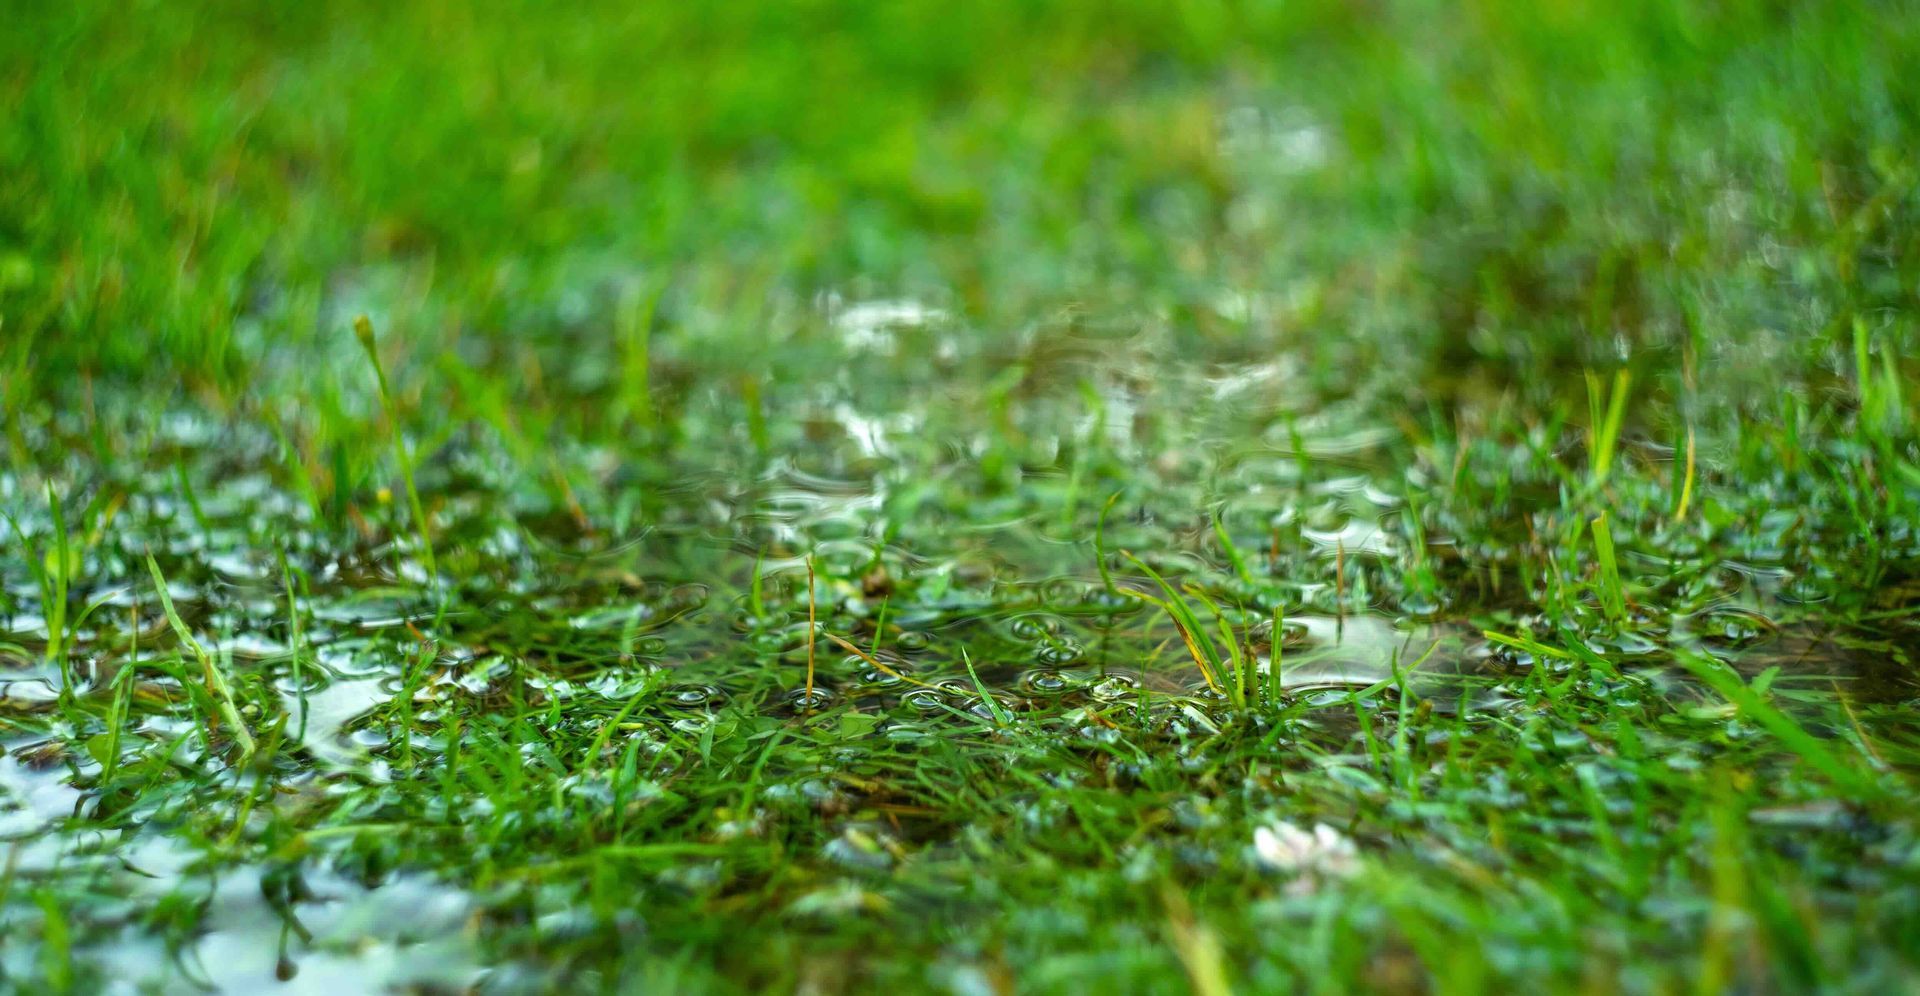 a close up of a puddle of water on a lush green lawn.